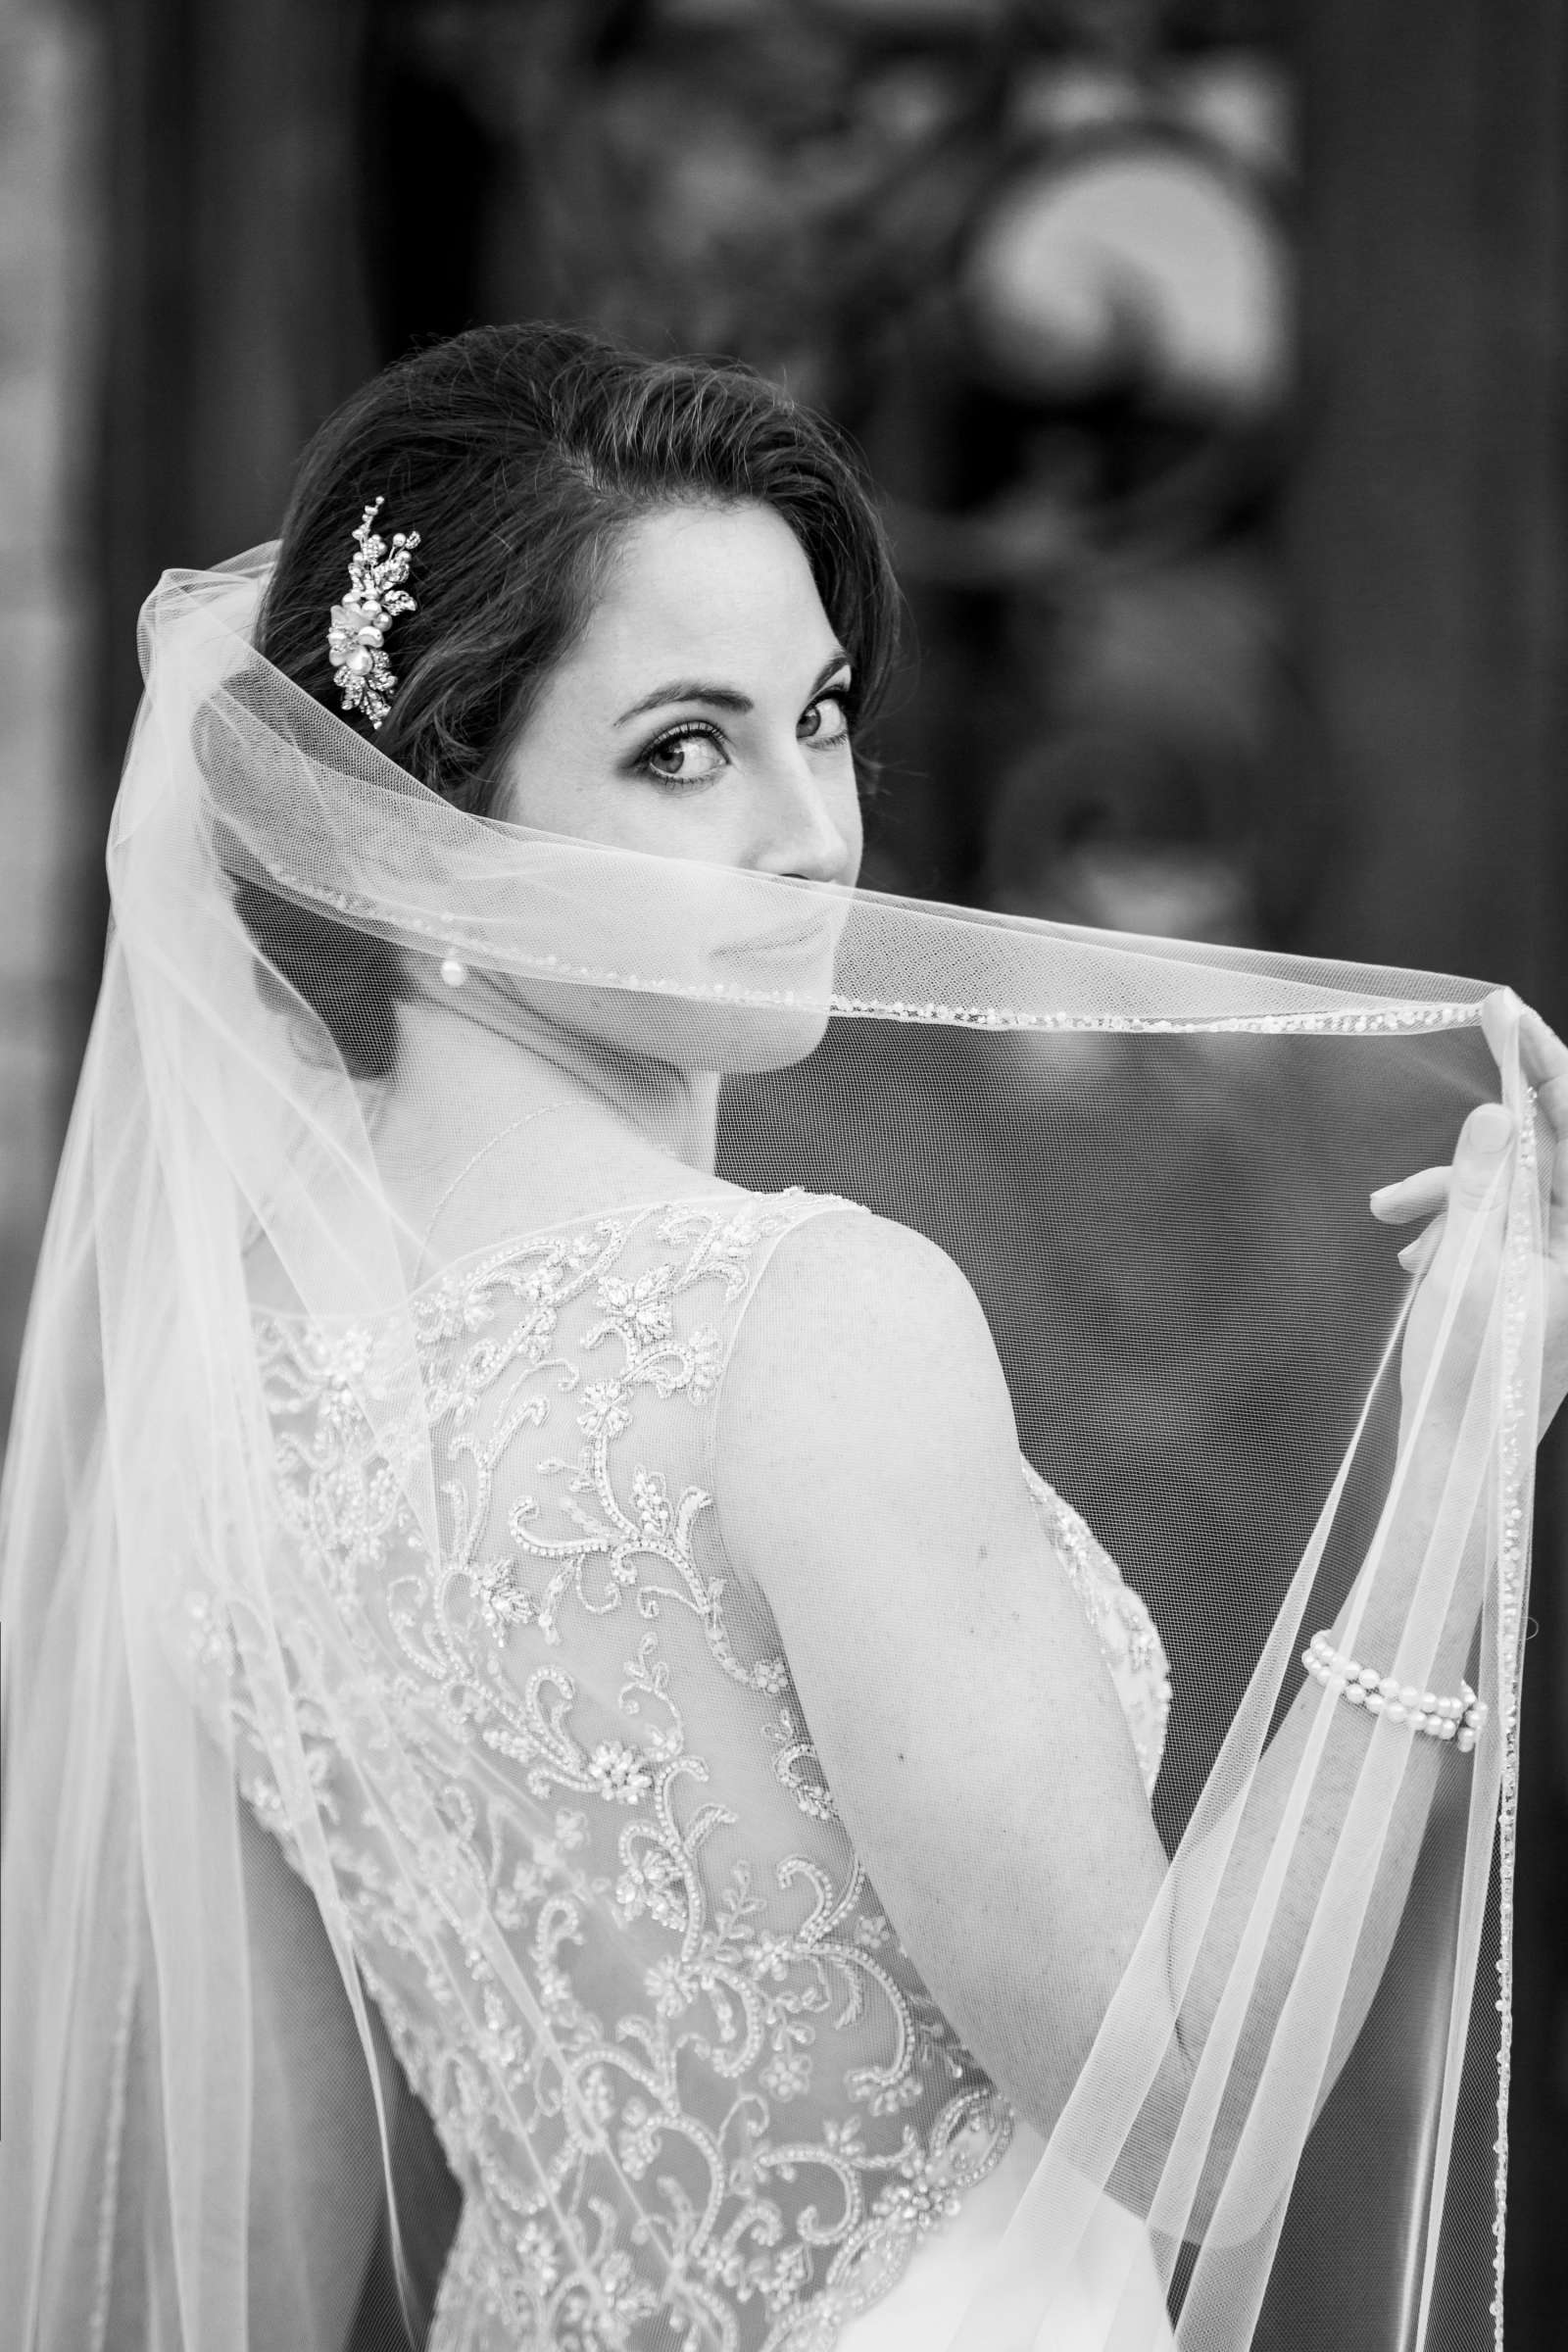 Bride, Veil, Black and White photo at Hearst Castle Wedding, Hanah and Wesley Wedding Photo #2 by True Photography